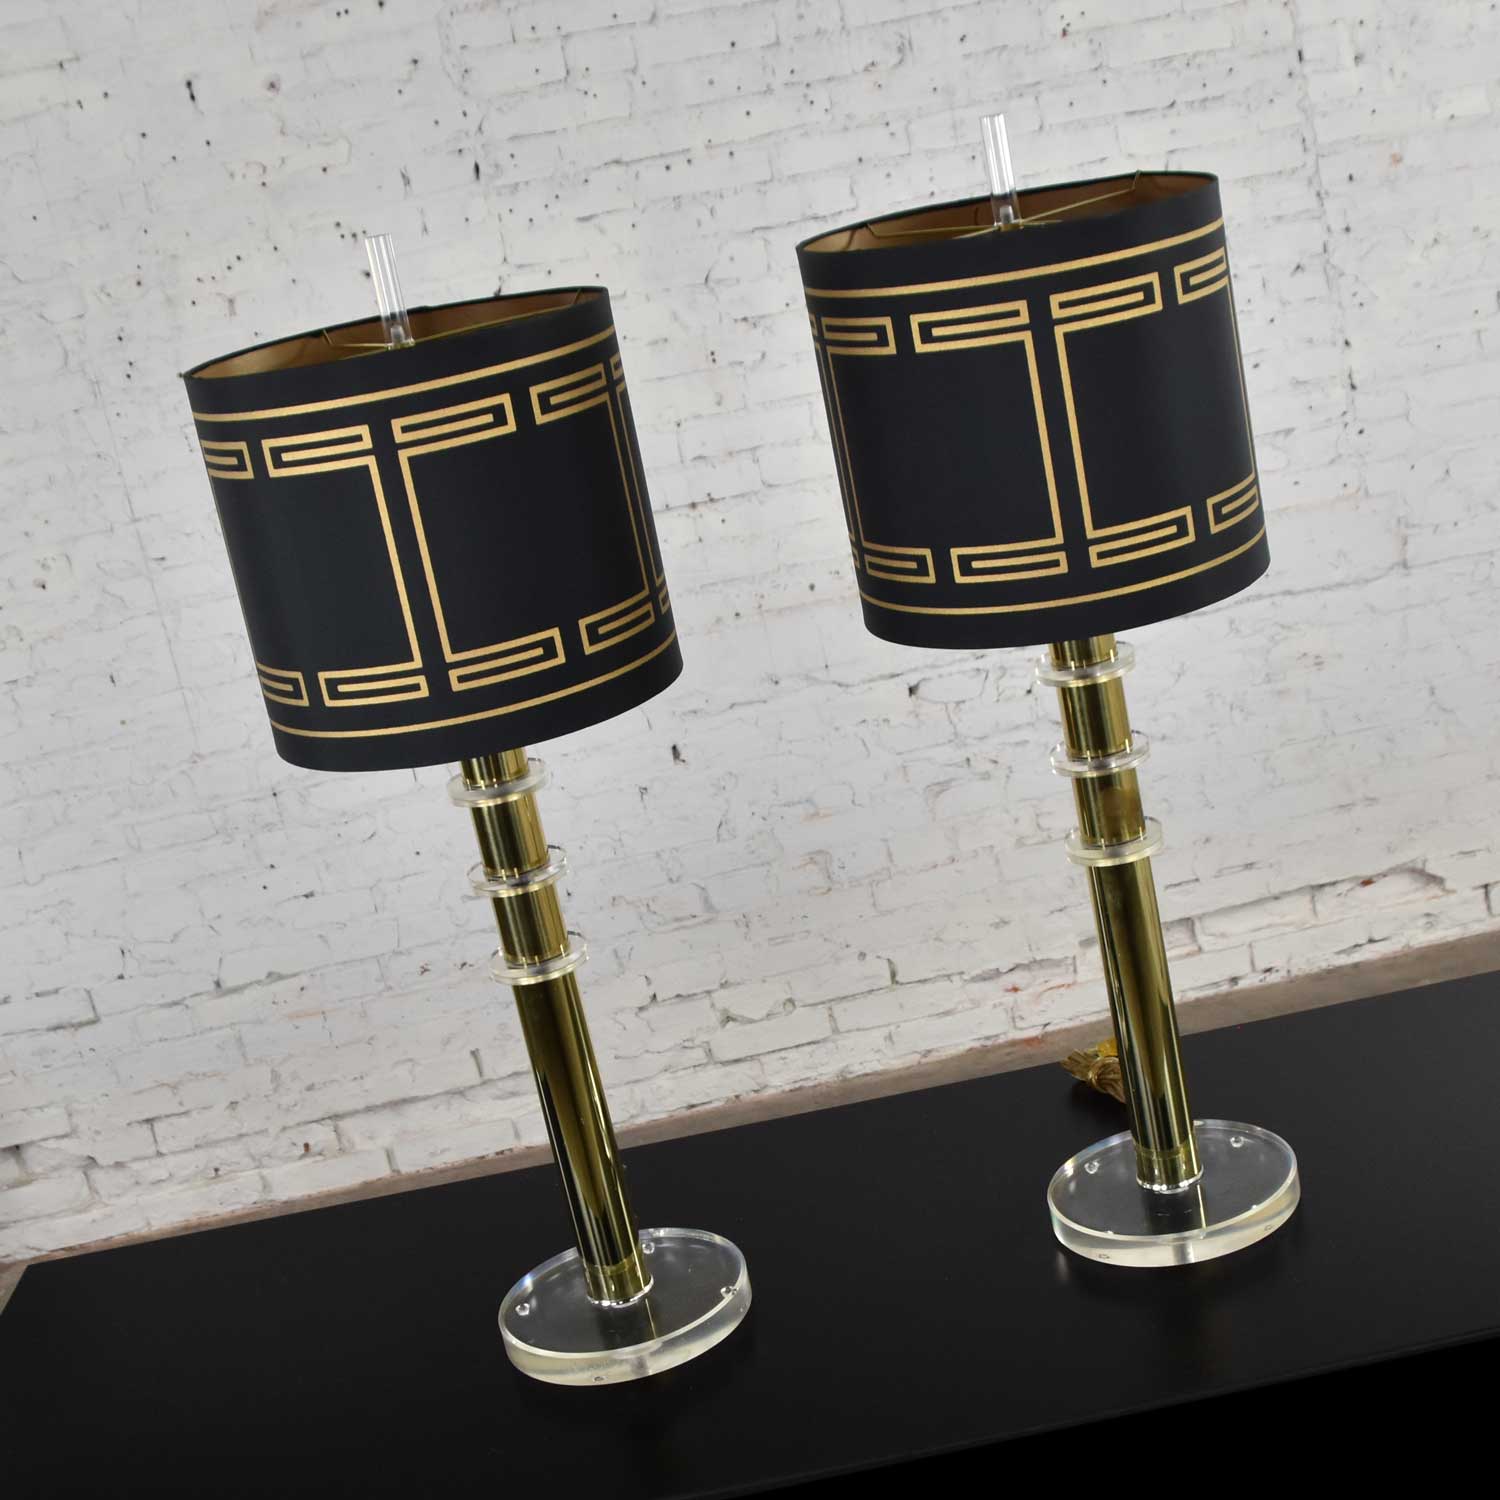 Modern Hollywood Regency Lucite & Brass Plate Lamps Chartreuse Green Shades a Pair Style Karl Springer